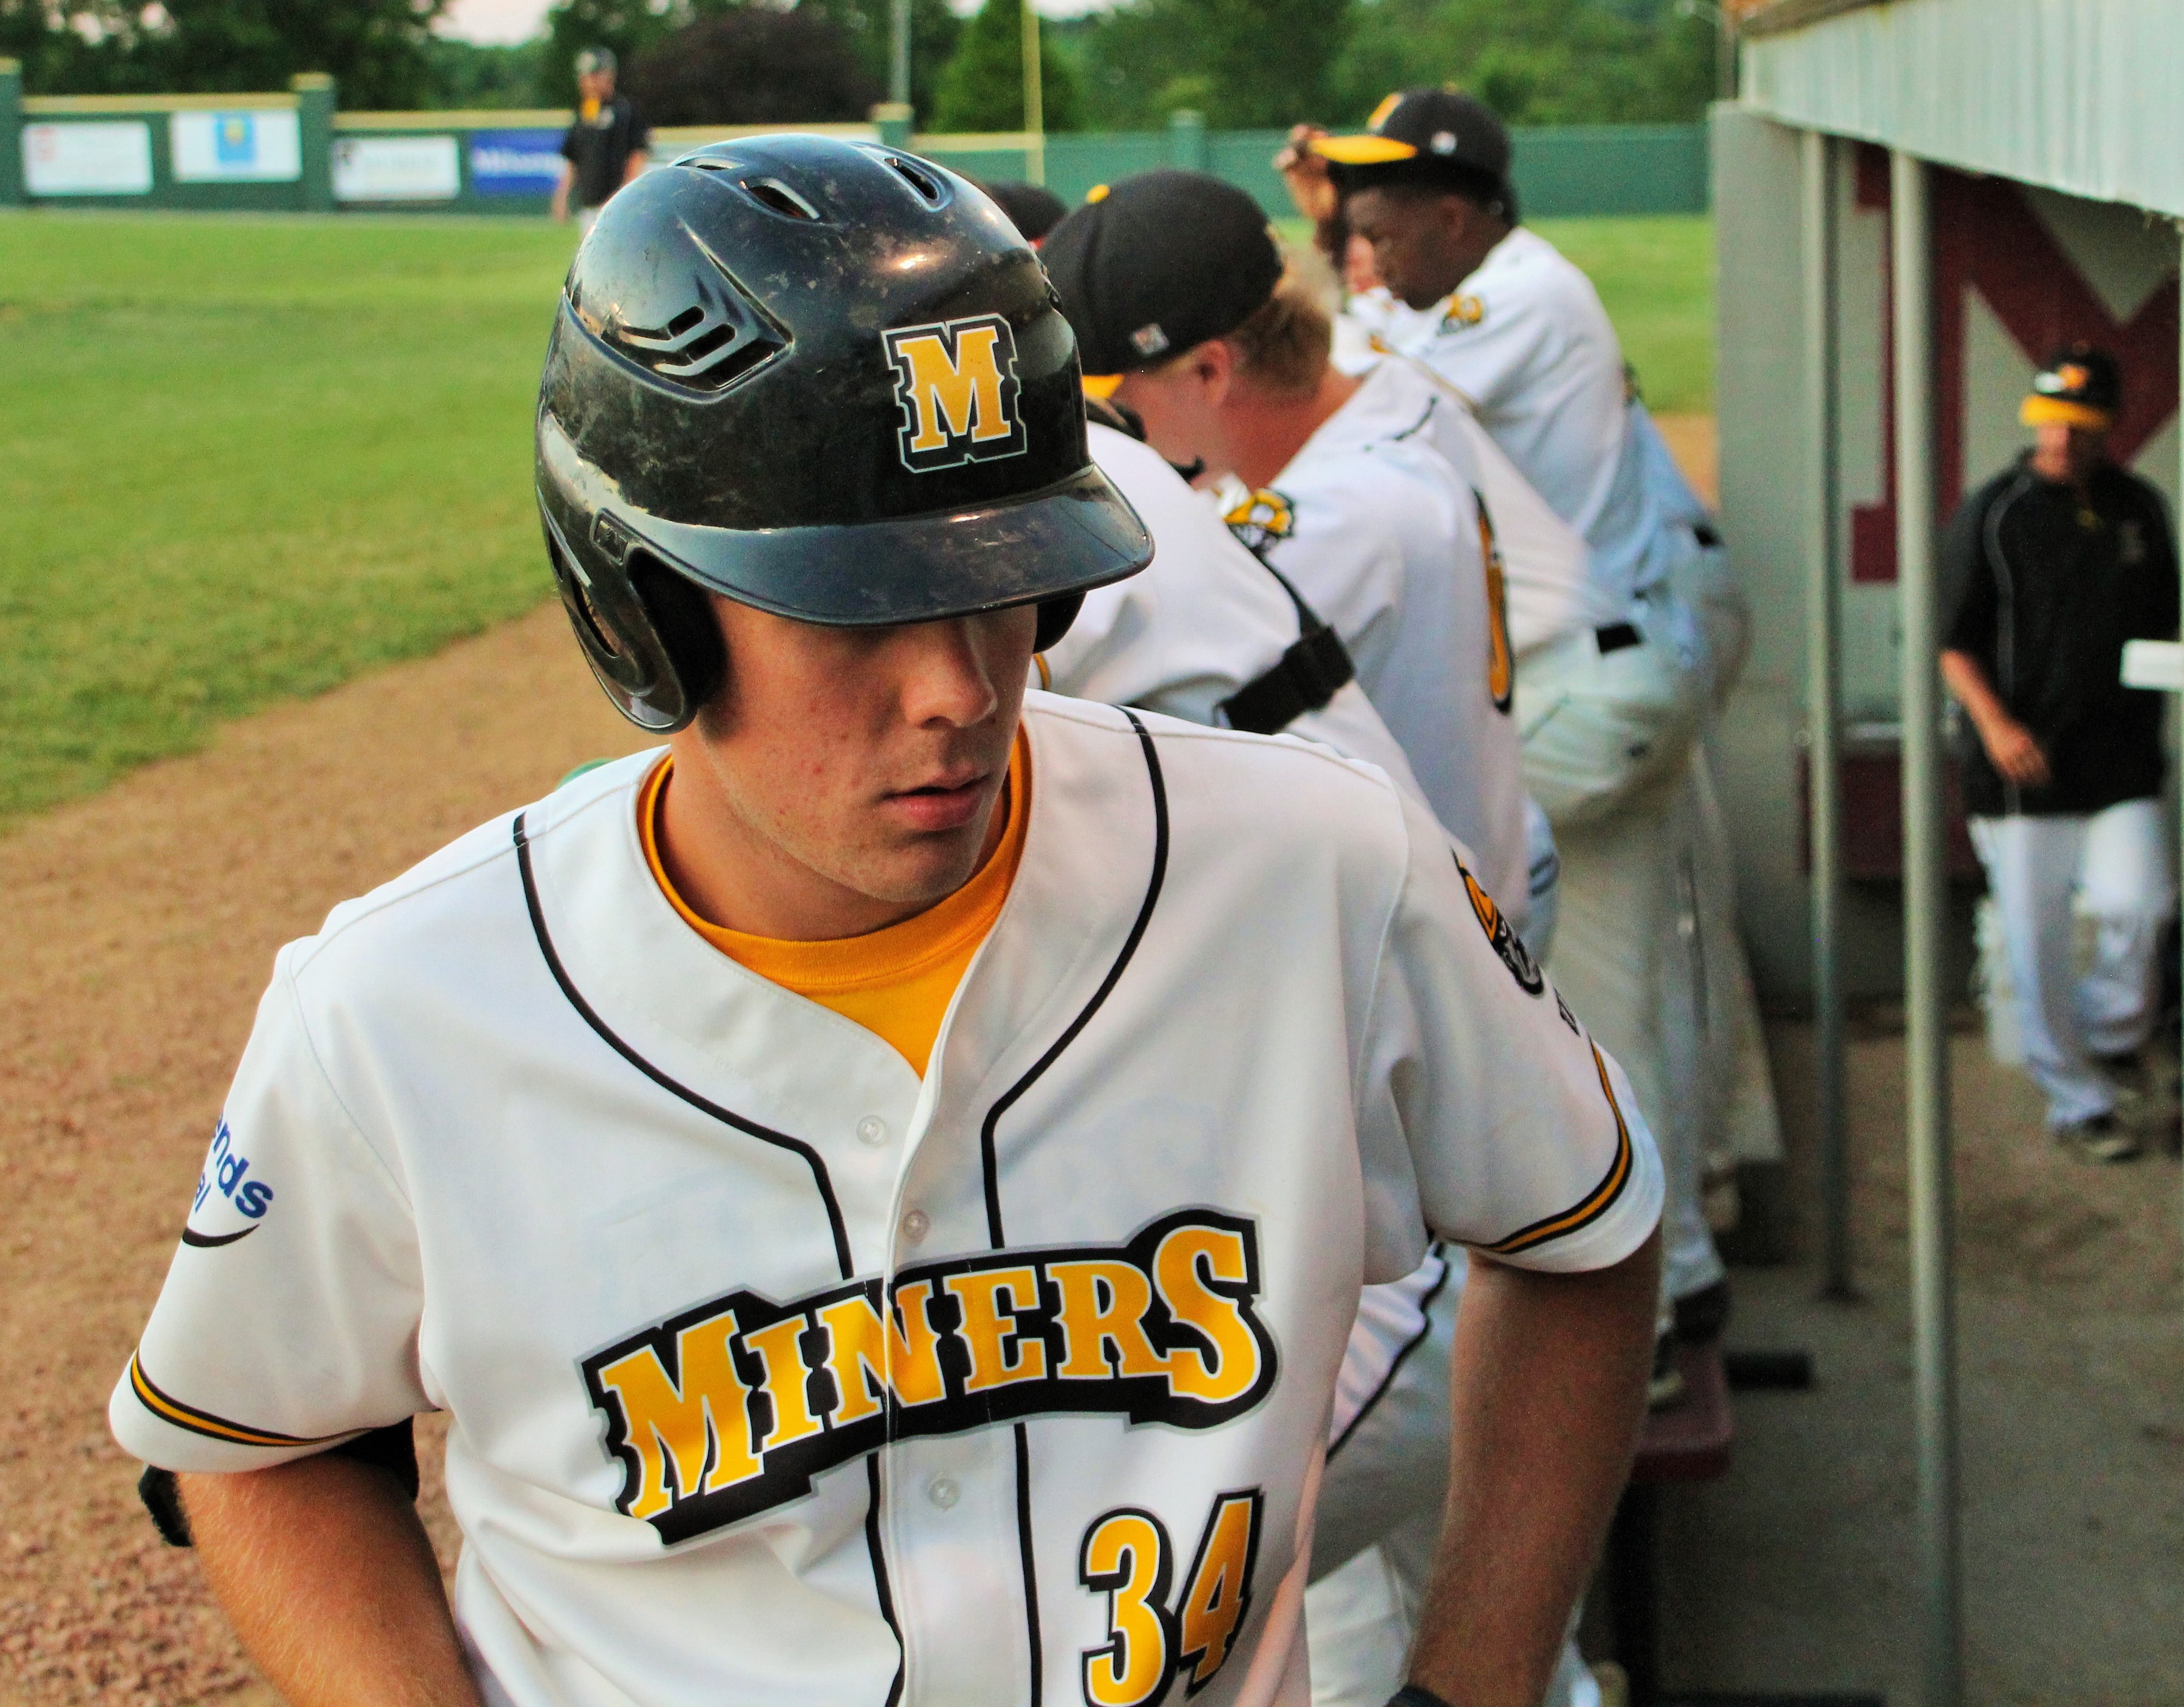 The Madisonville Miners